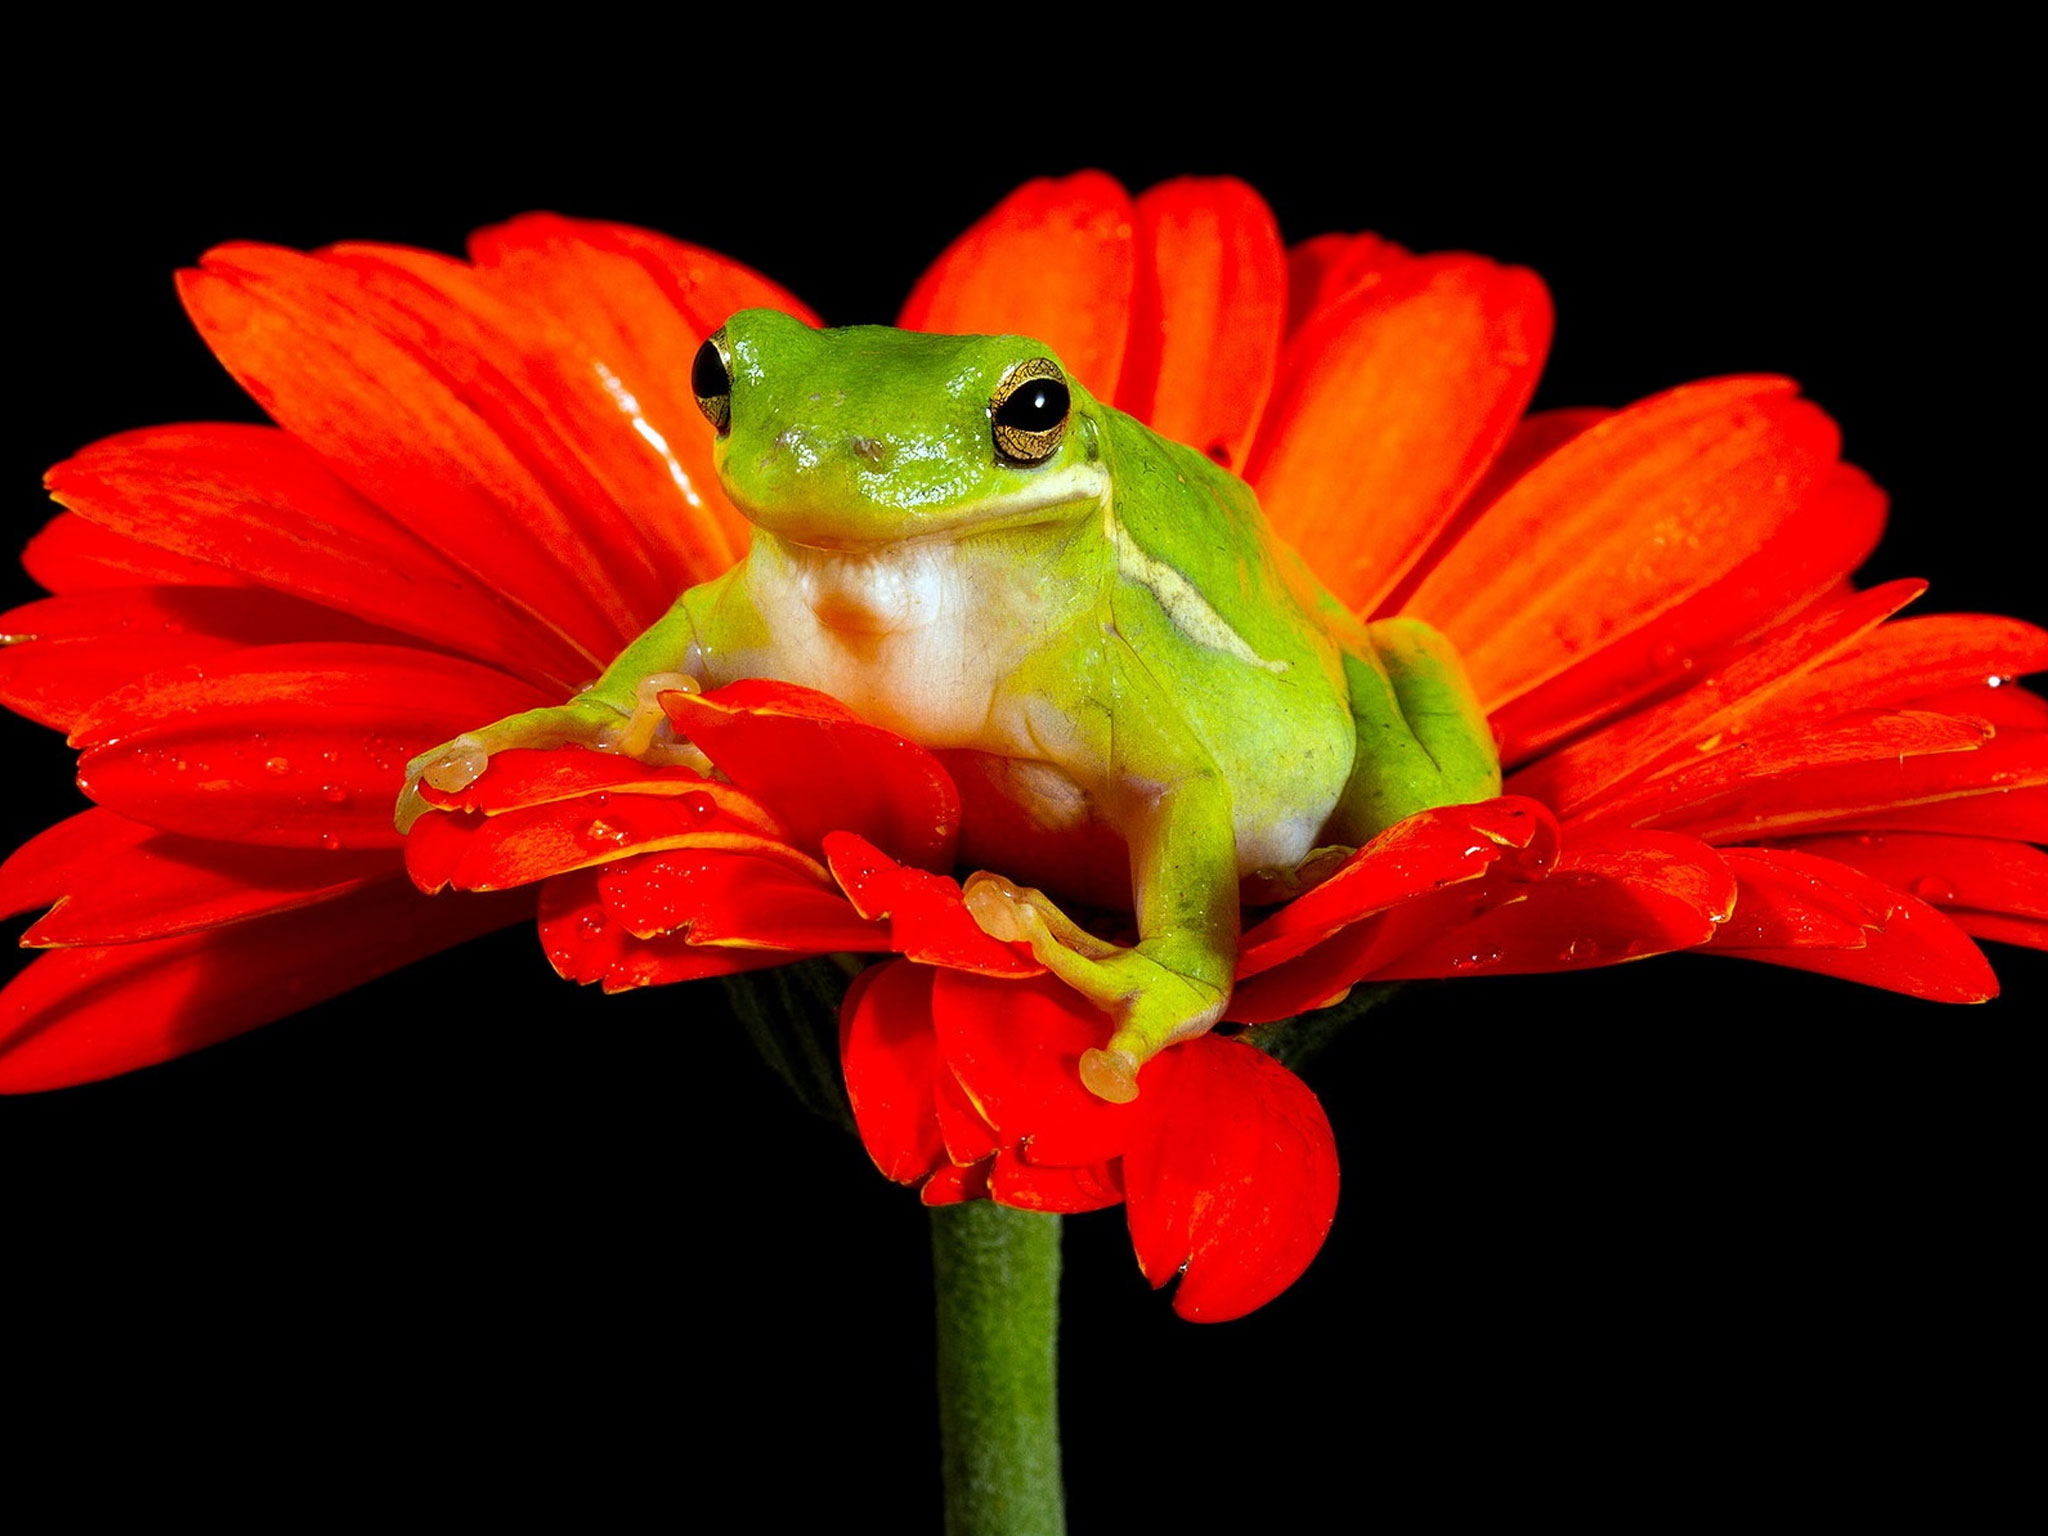 Frog Red Flower Black Background iPad Wallpaper Air